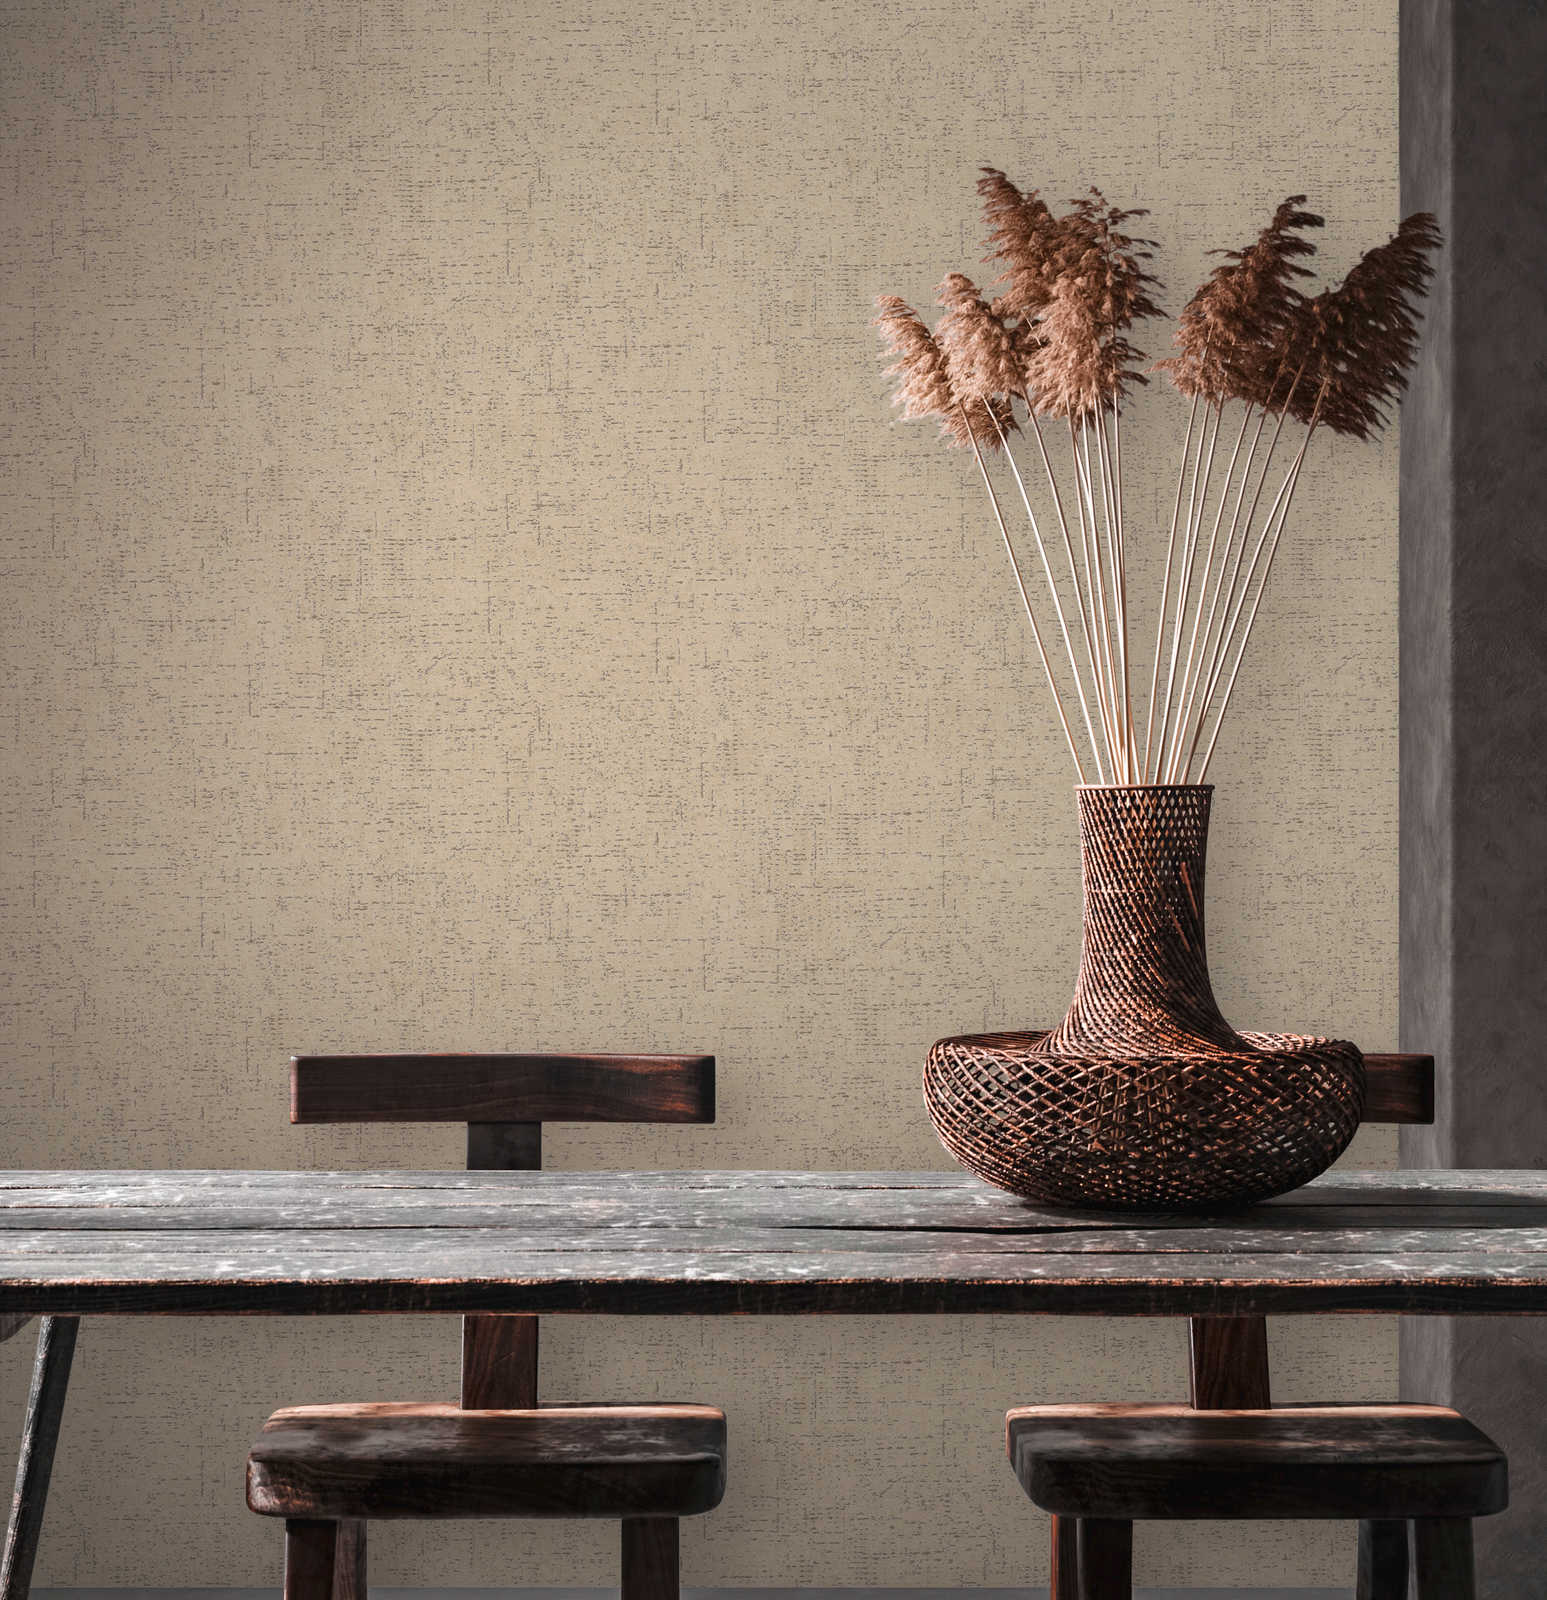             Wallpaper with rustic plaster look in industrial style - brown
        